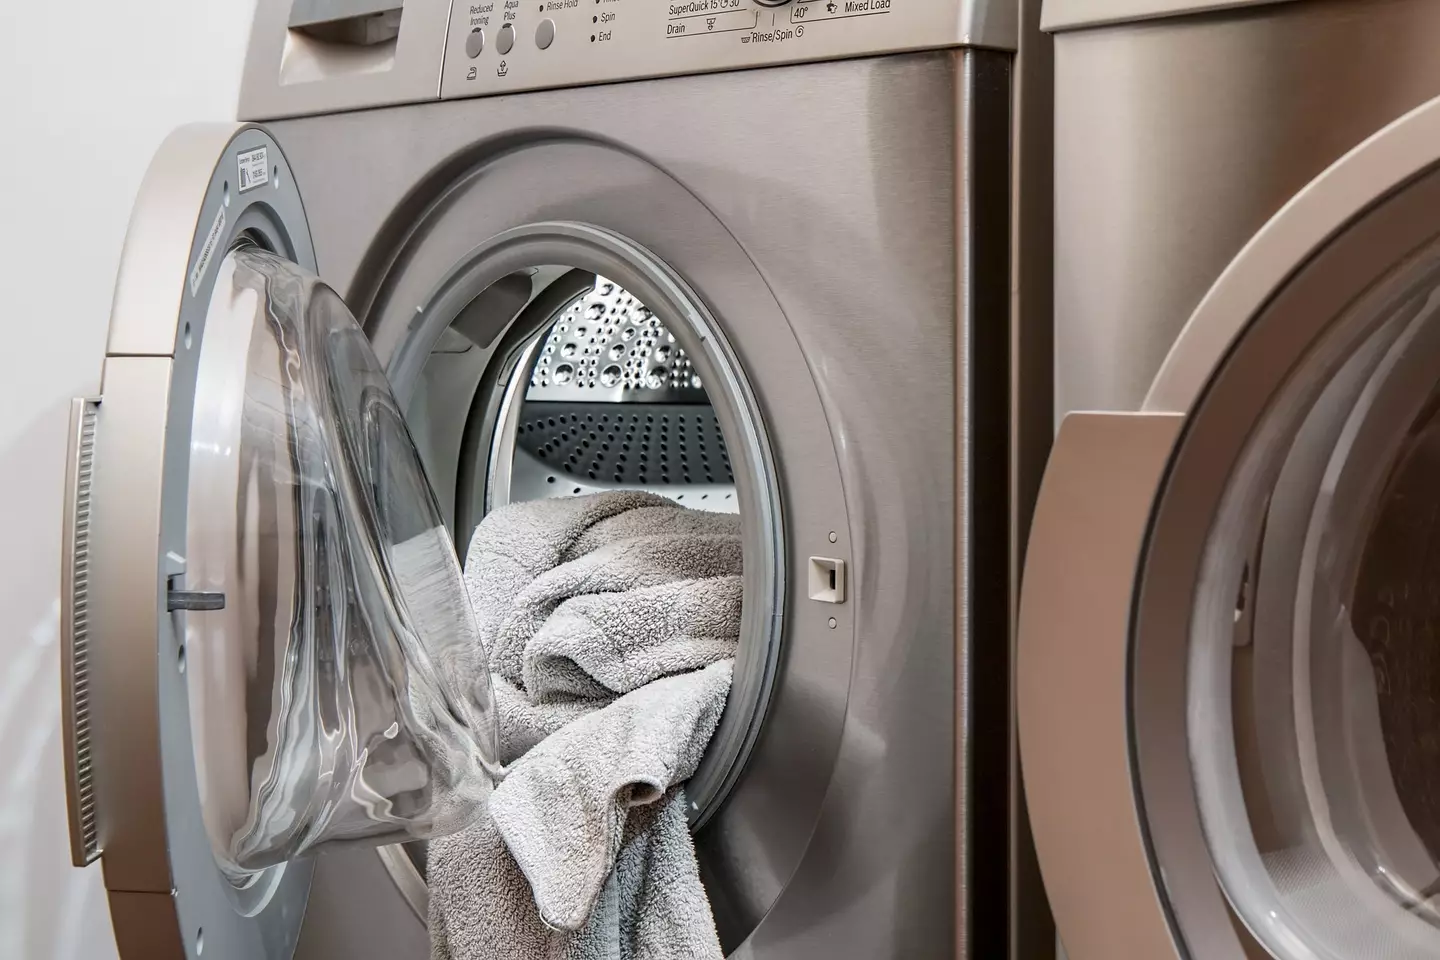 Those of us without a tumble dryer might struggle to dry clothes as winter draws in.